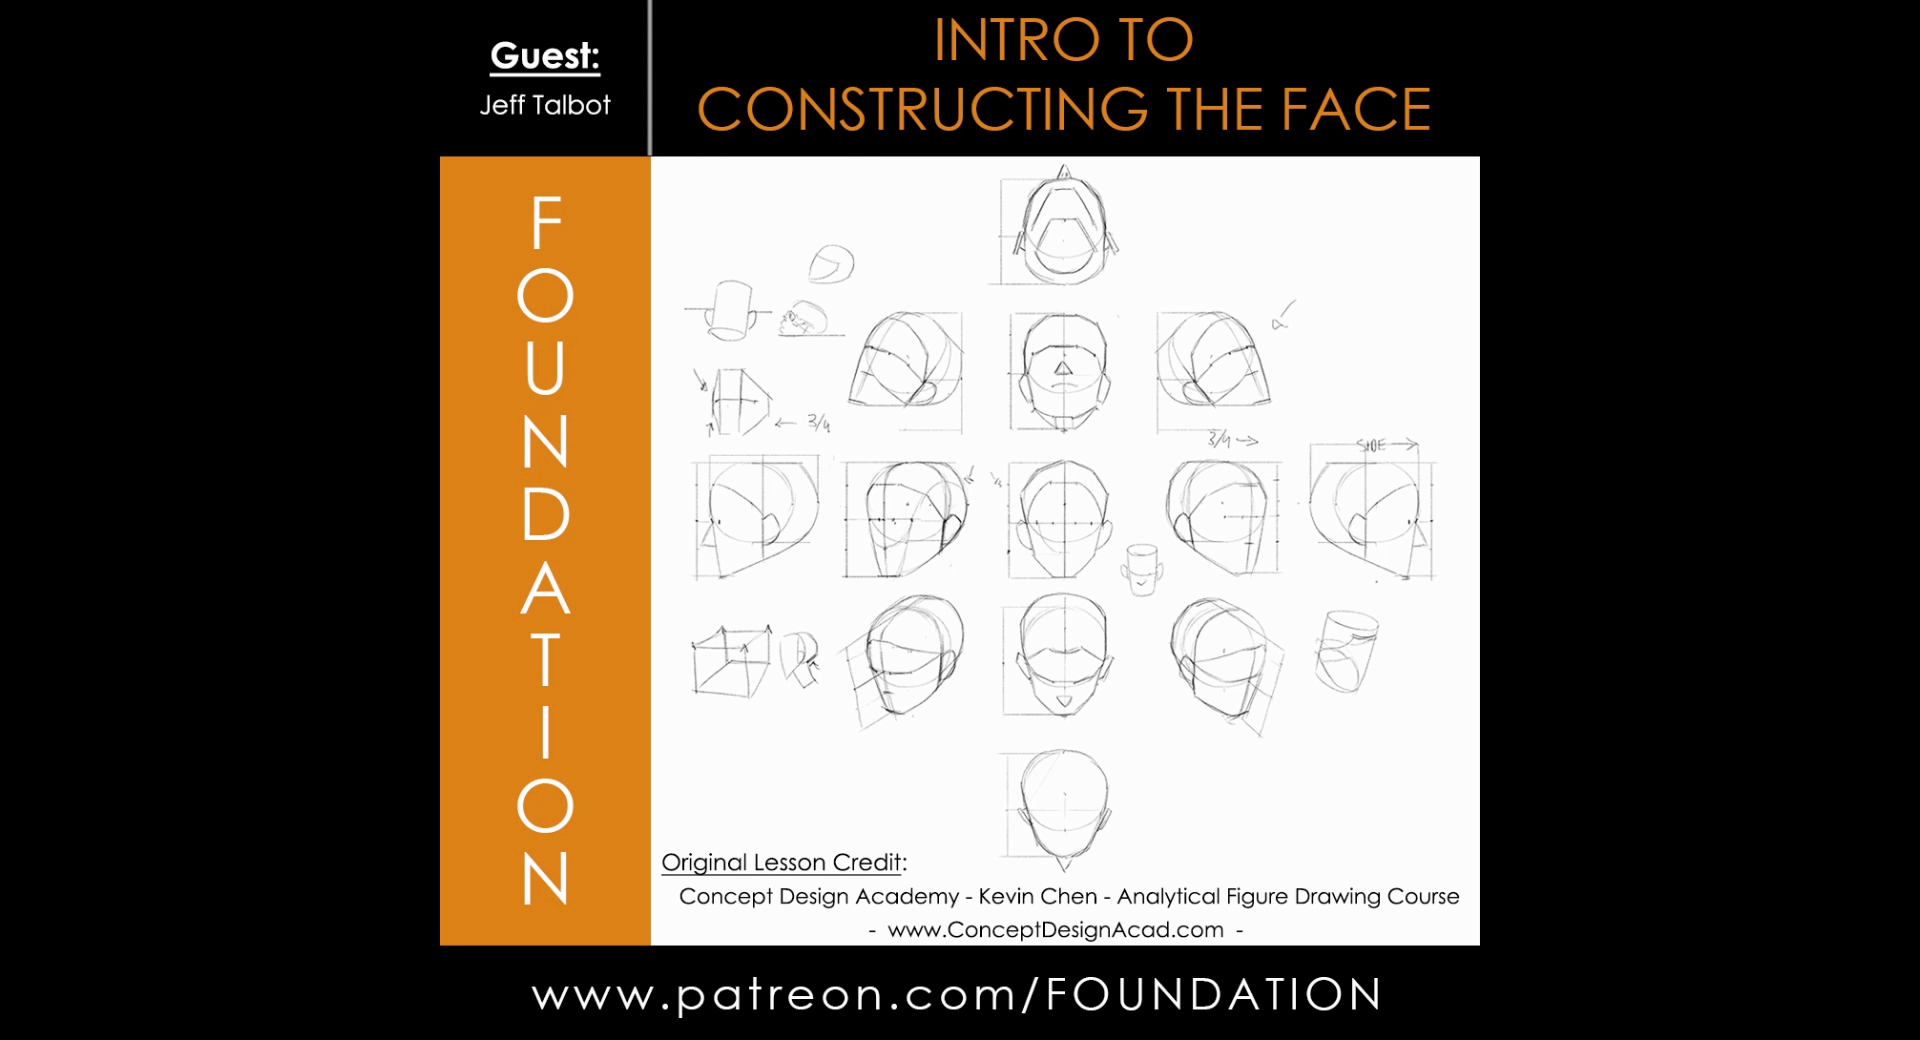 Intro to Constructing the Face with Jeff Talbot